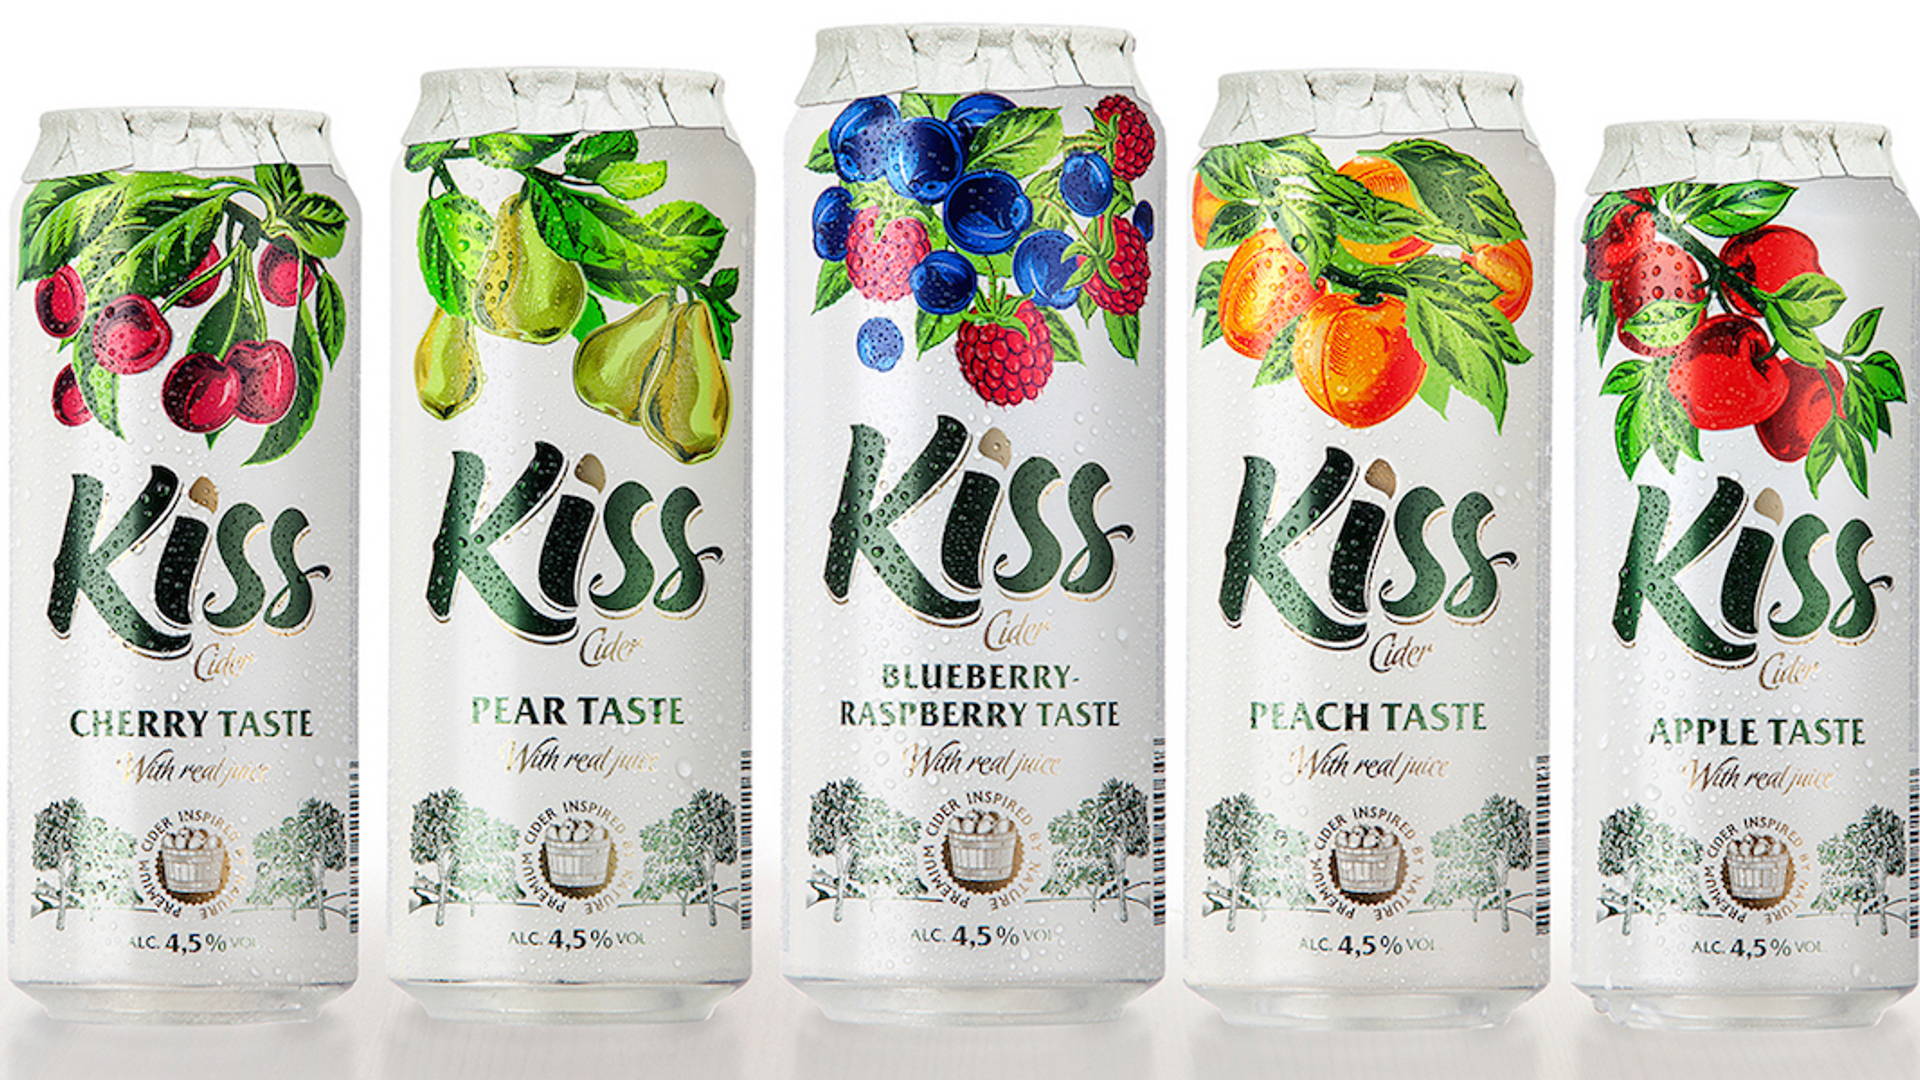 Featured image for Kiss Cider